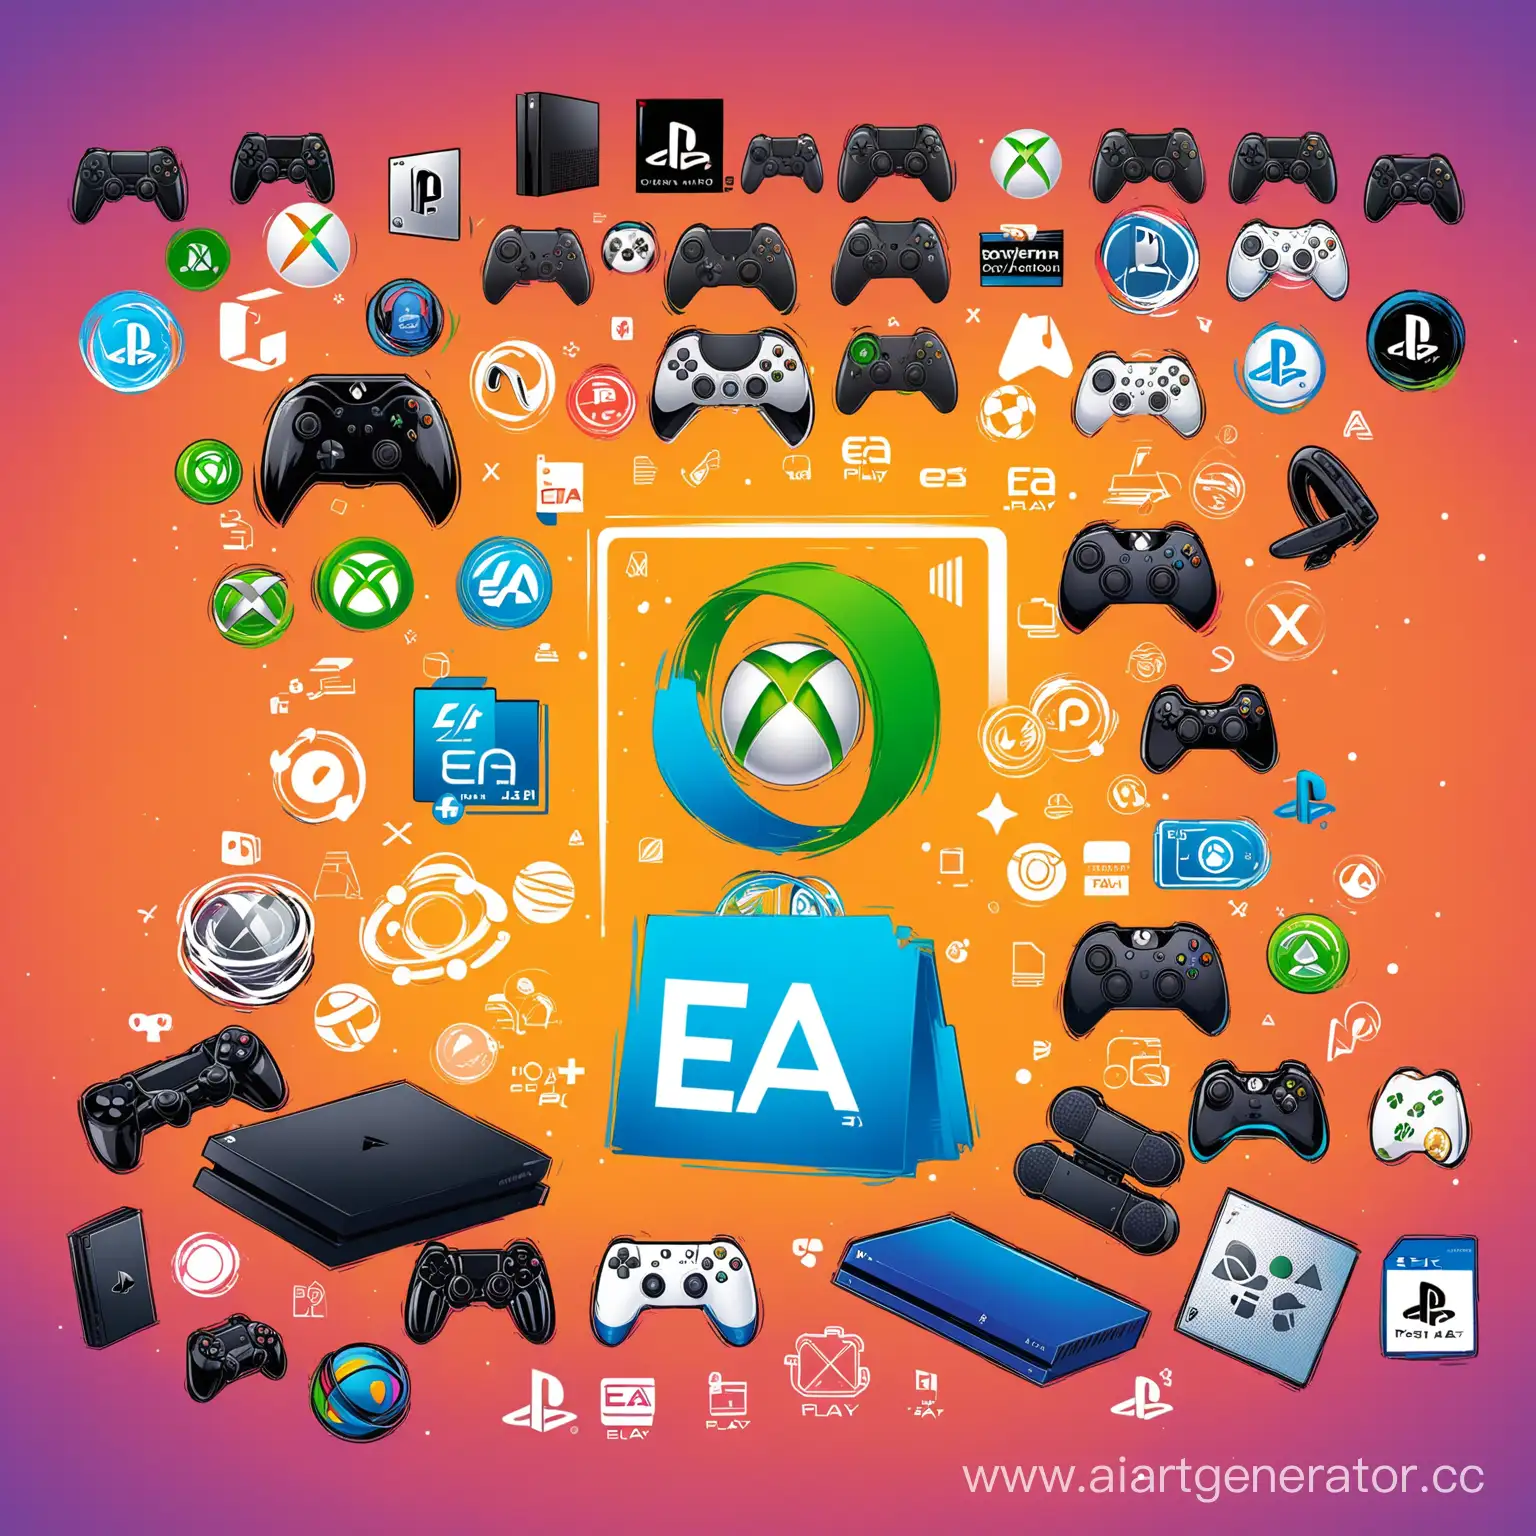 Exciting-Gaming-Deals-PlayStation-Xbox-and-EA-Games-Sale-and-Subscriptions